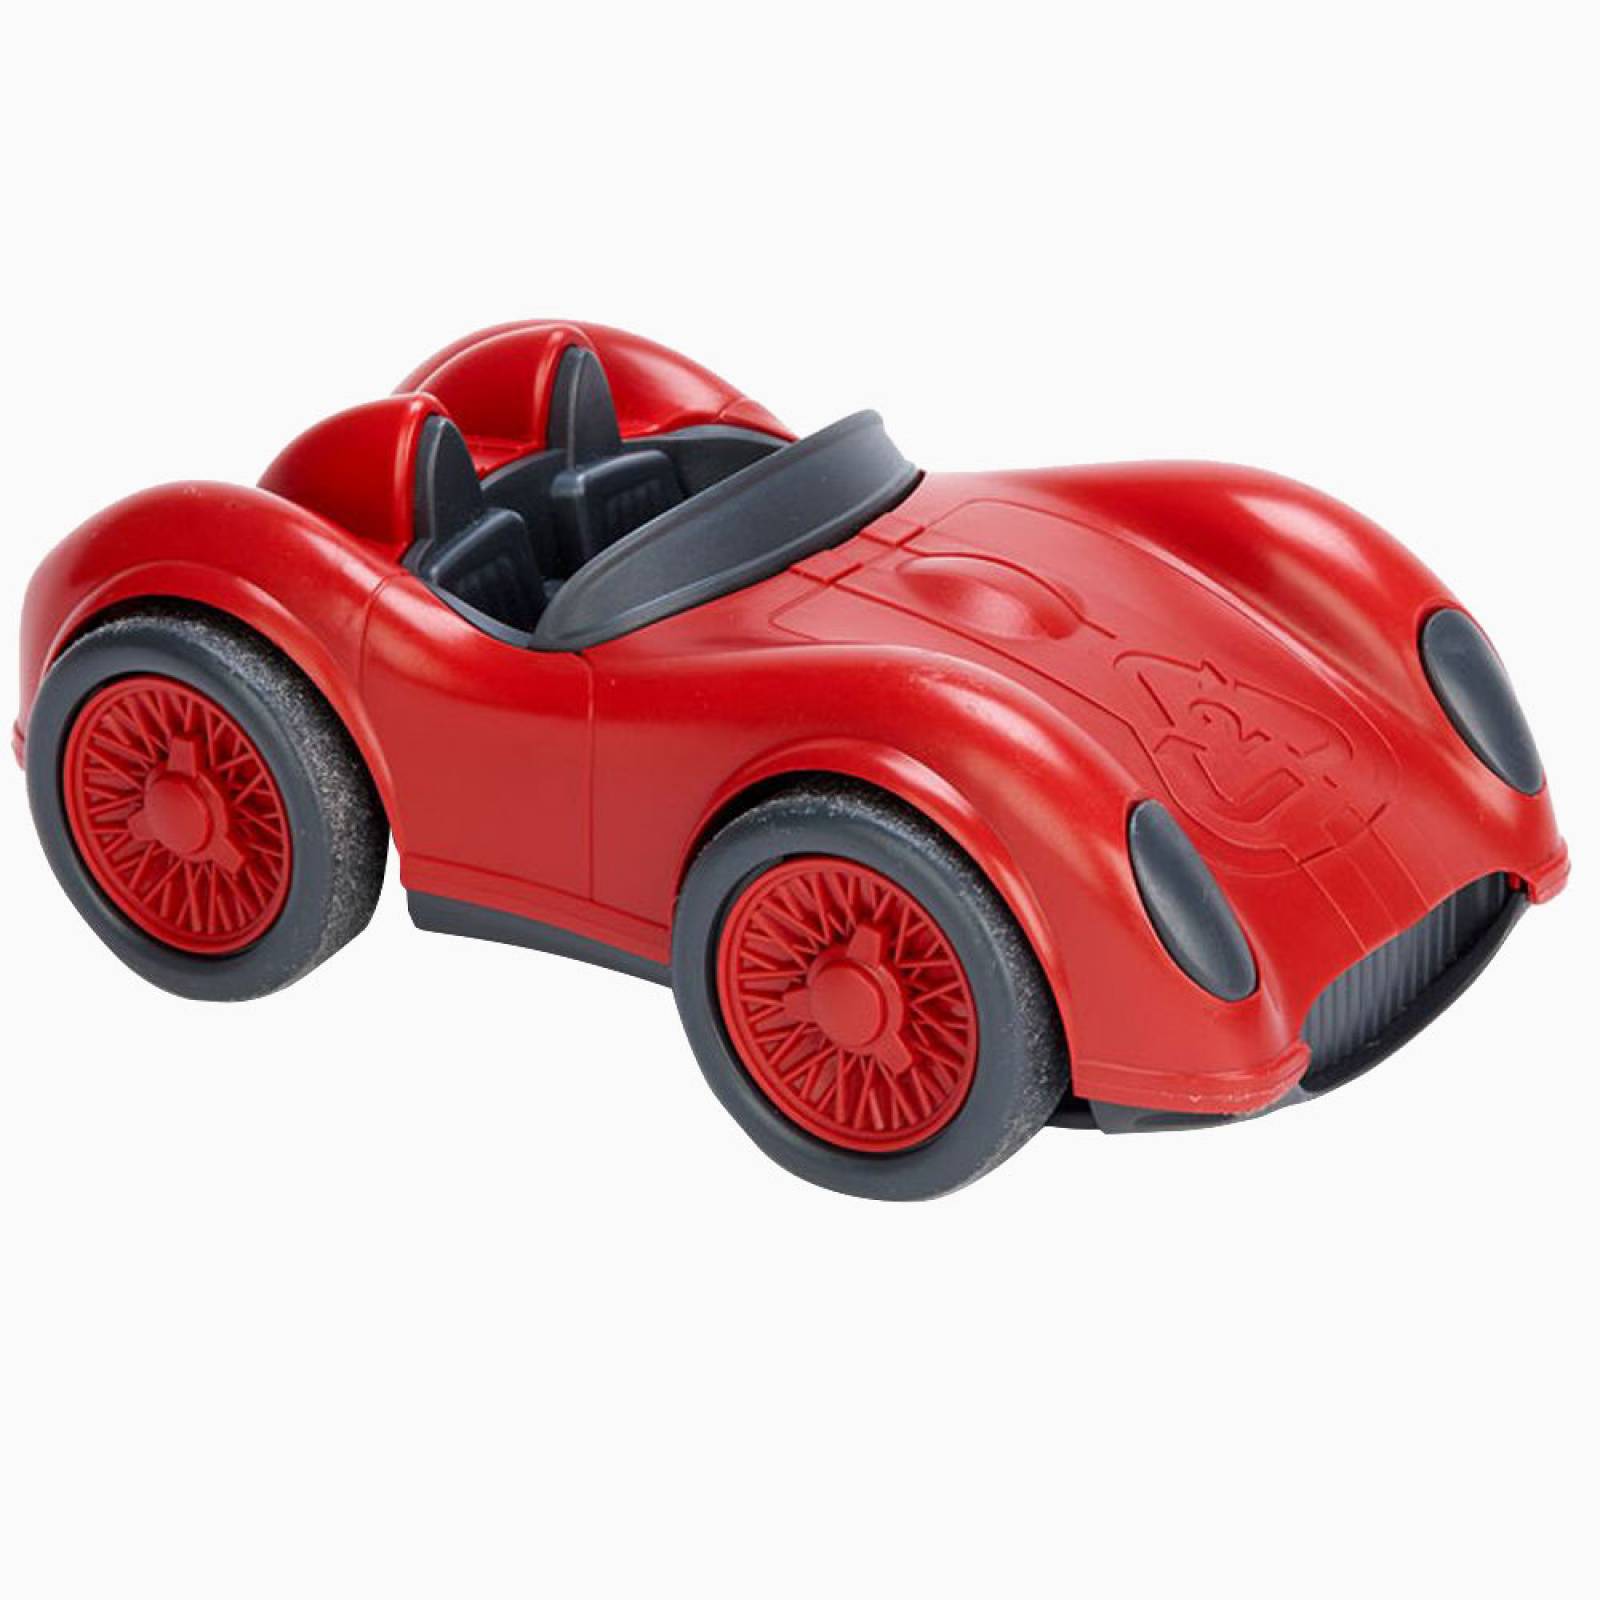 Red Race Car Recycled Plastic By Green Toys 3+